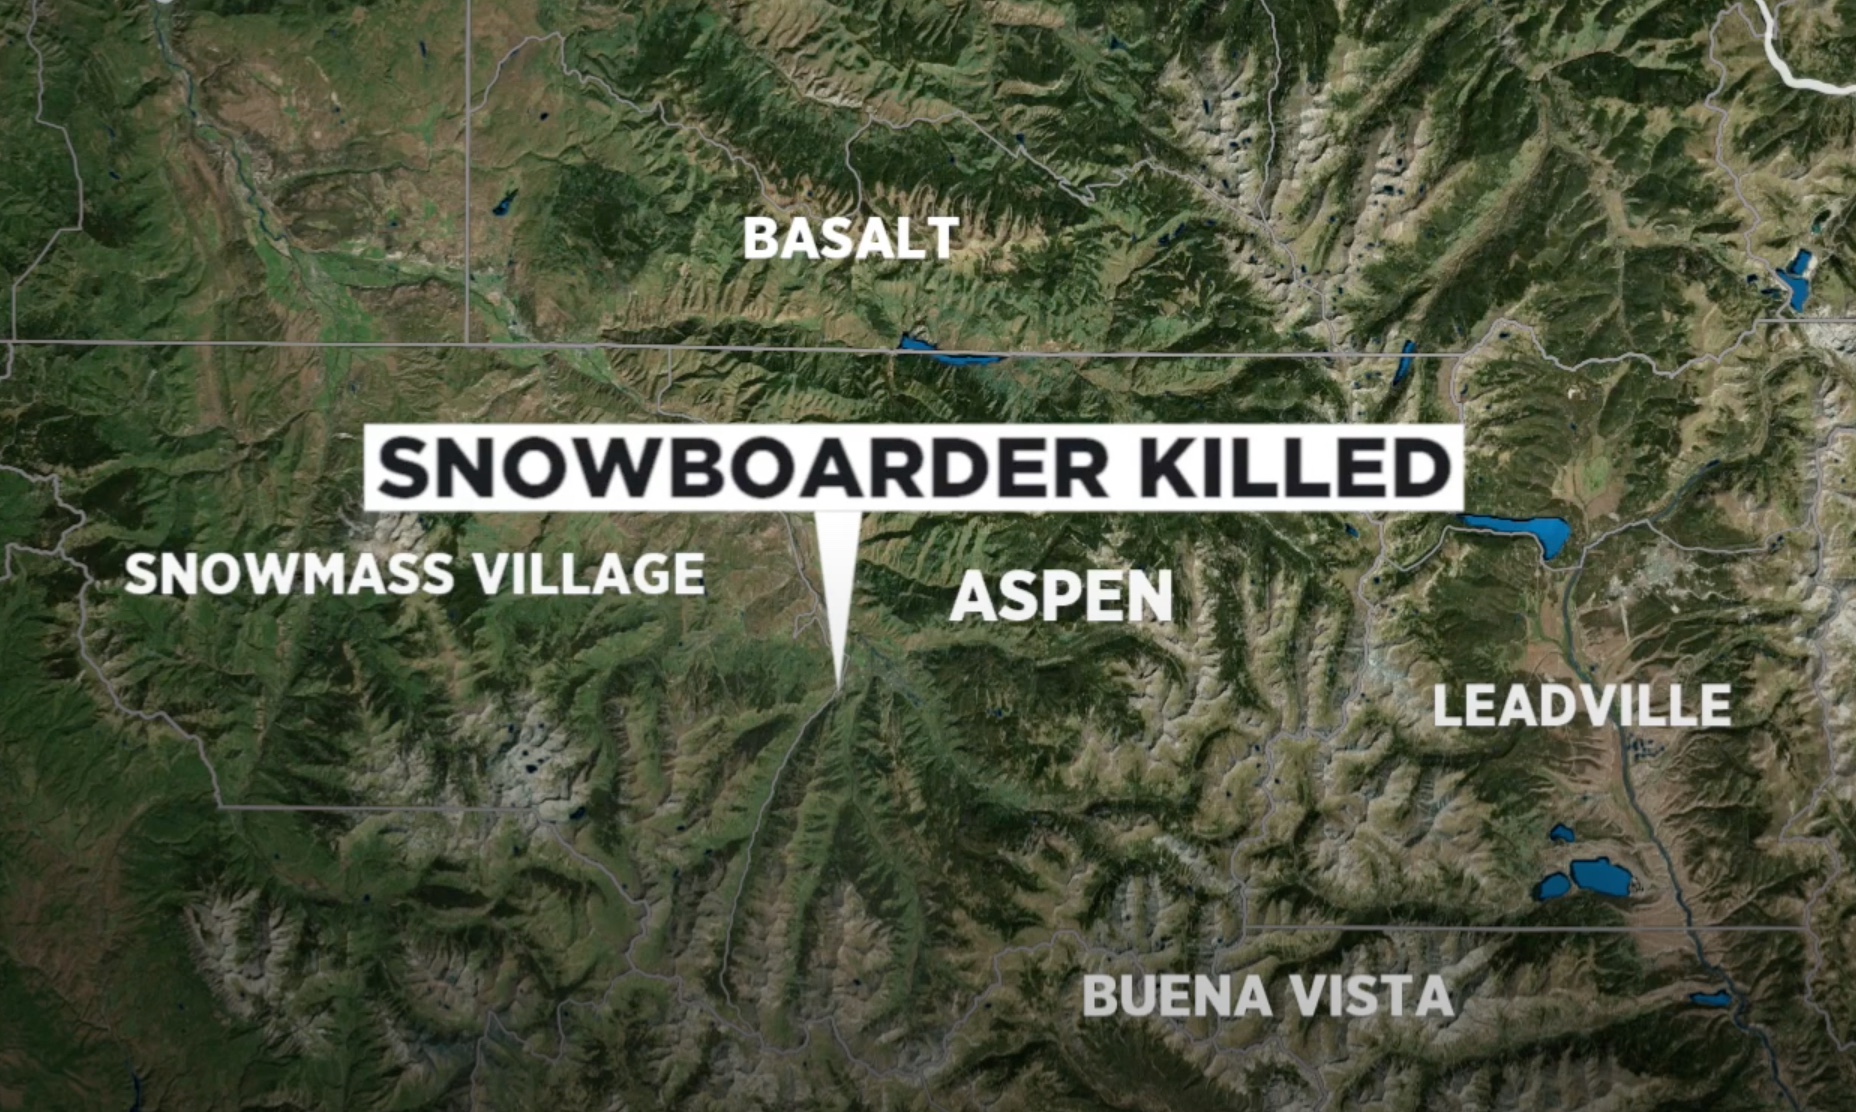 42-Year-Old Snowboarder Died After Tree Impact At Aspen Highlands Ski Area